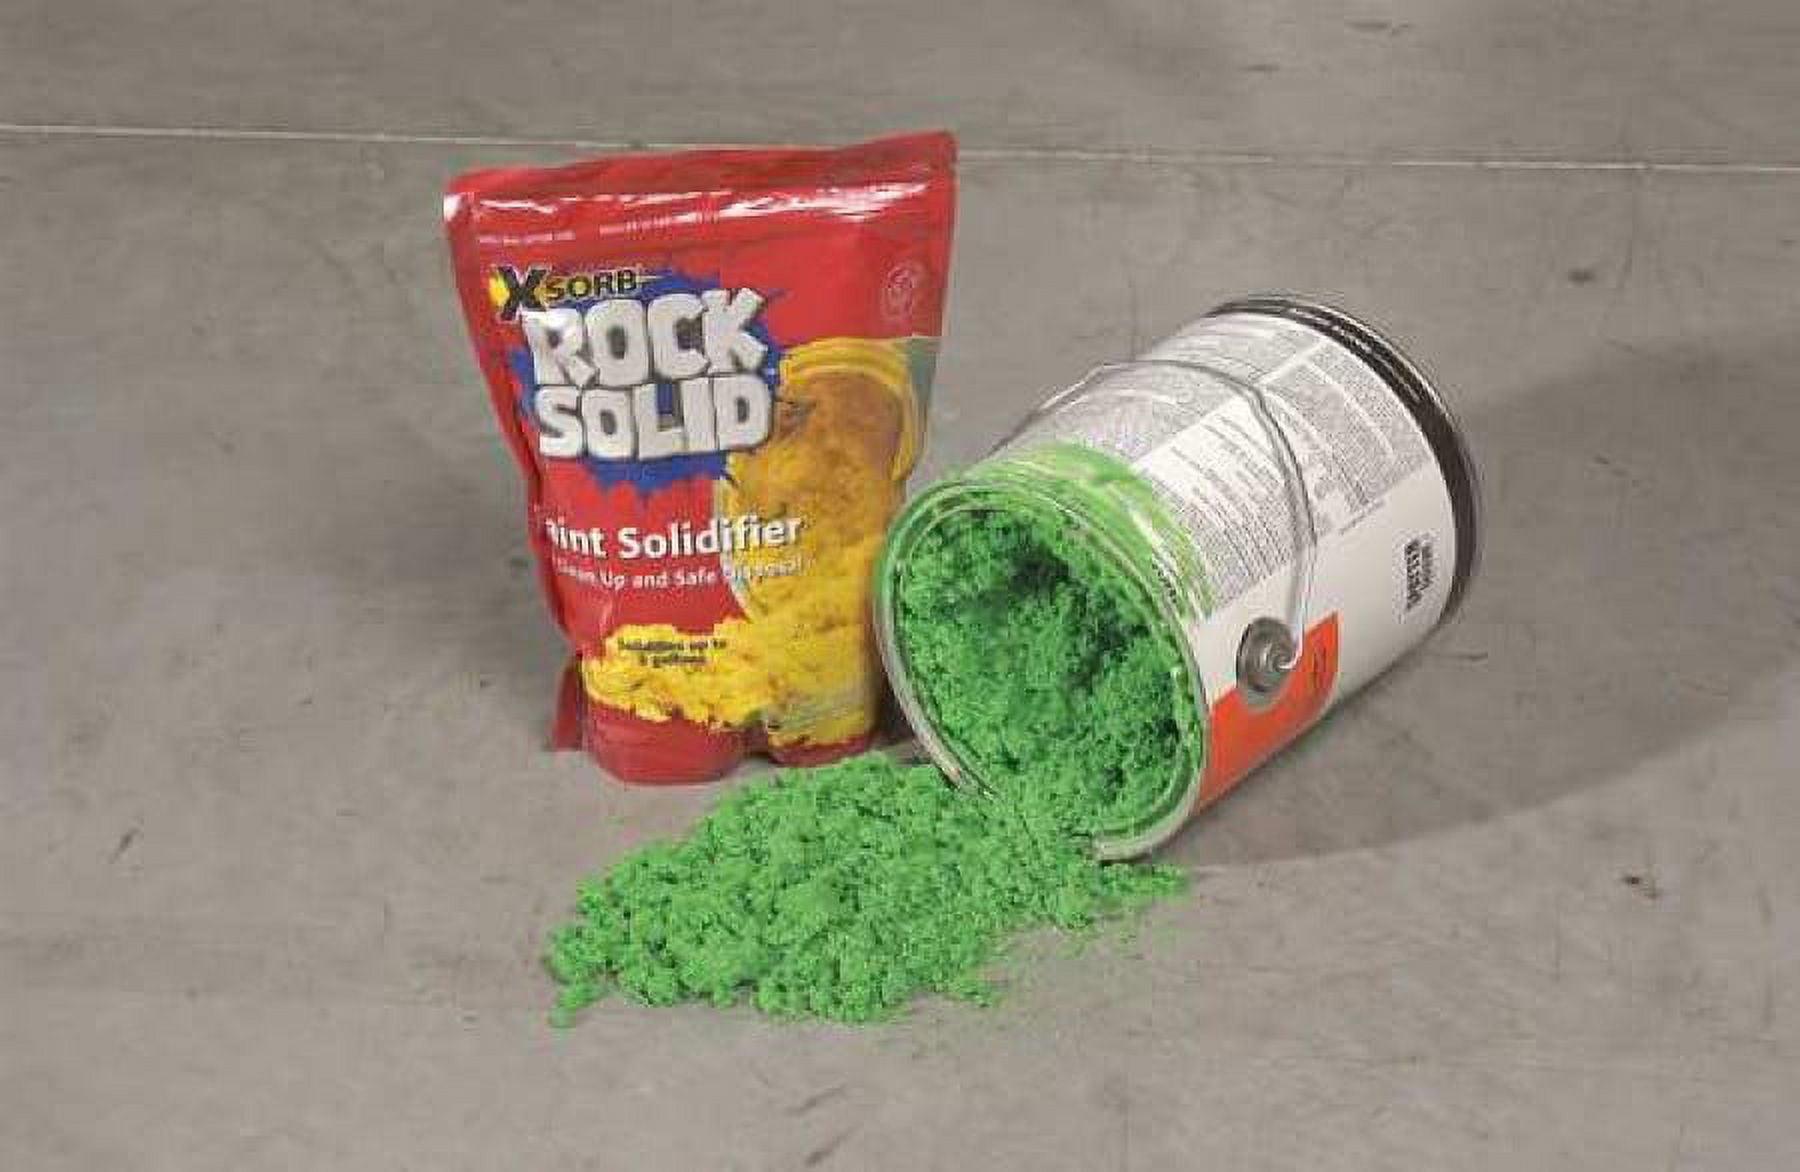 Rock Solid Paint Solidifier & Hardener 4 gal. Pail with Scoop - Spill Hero